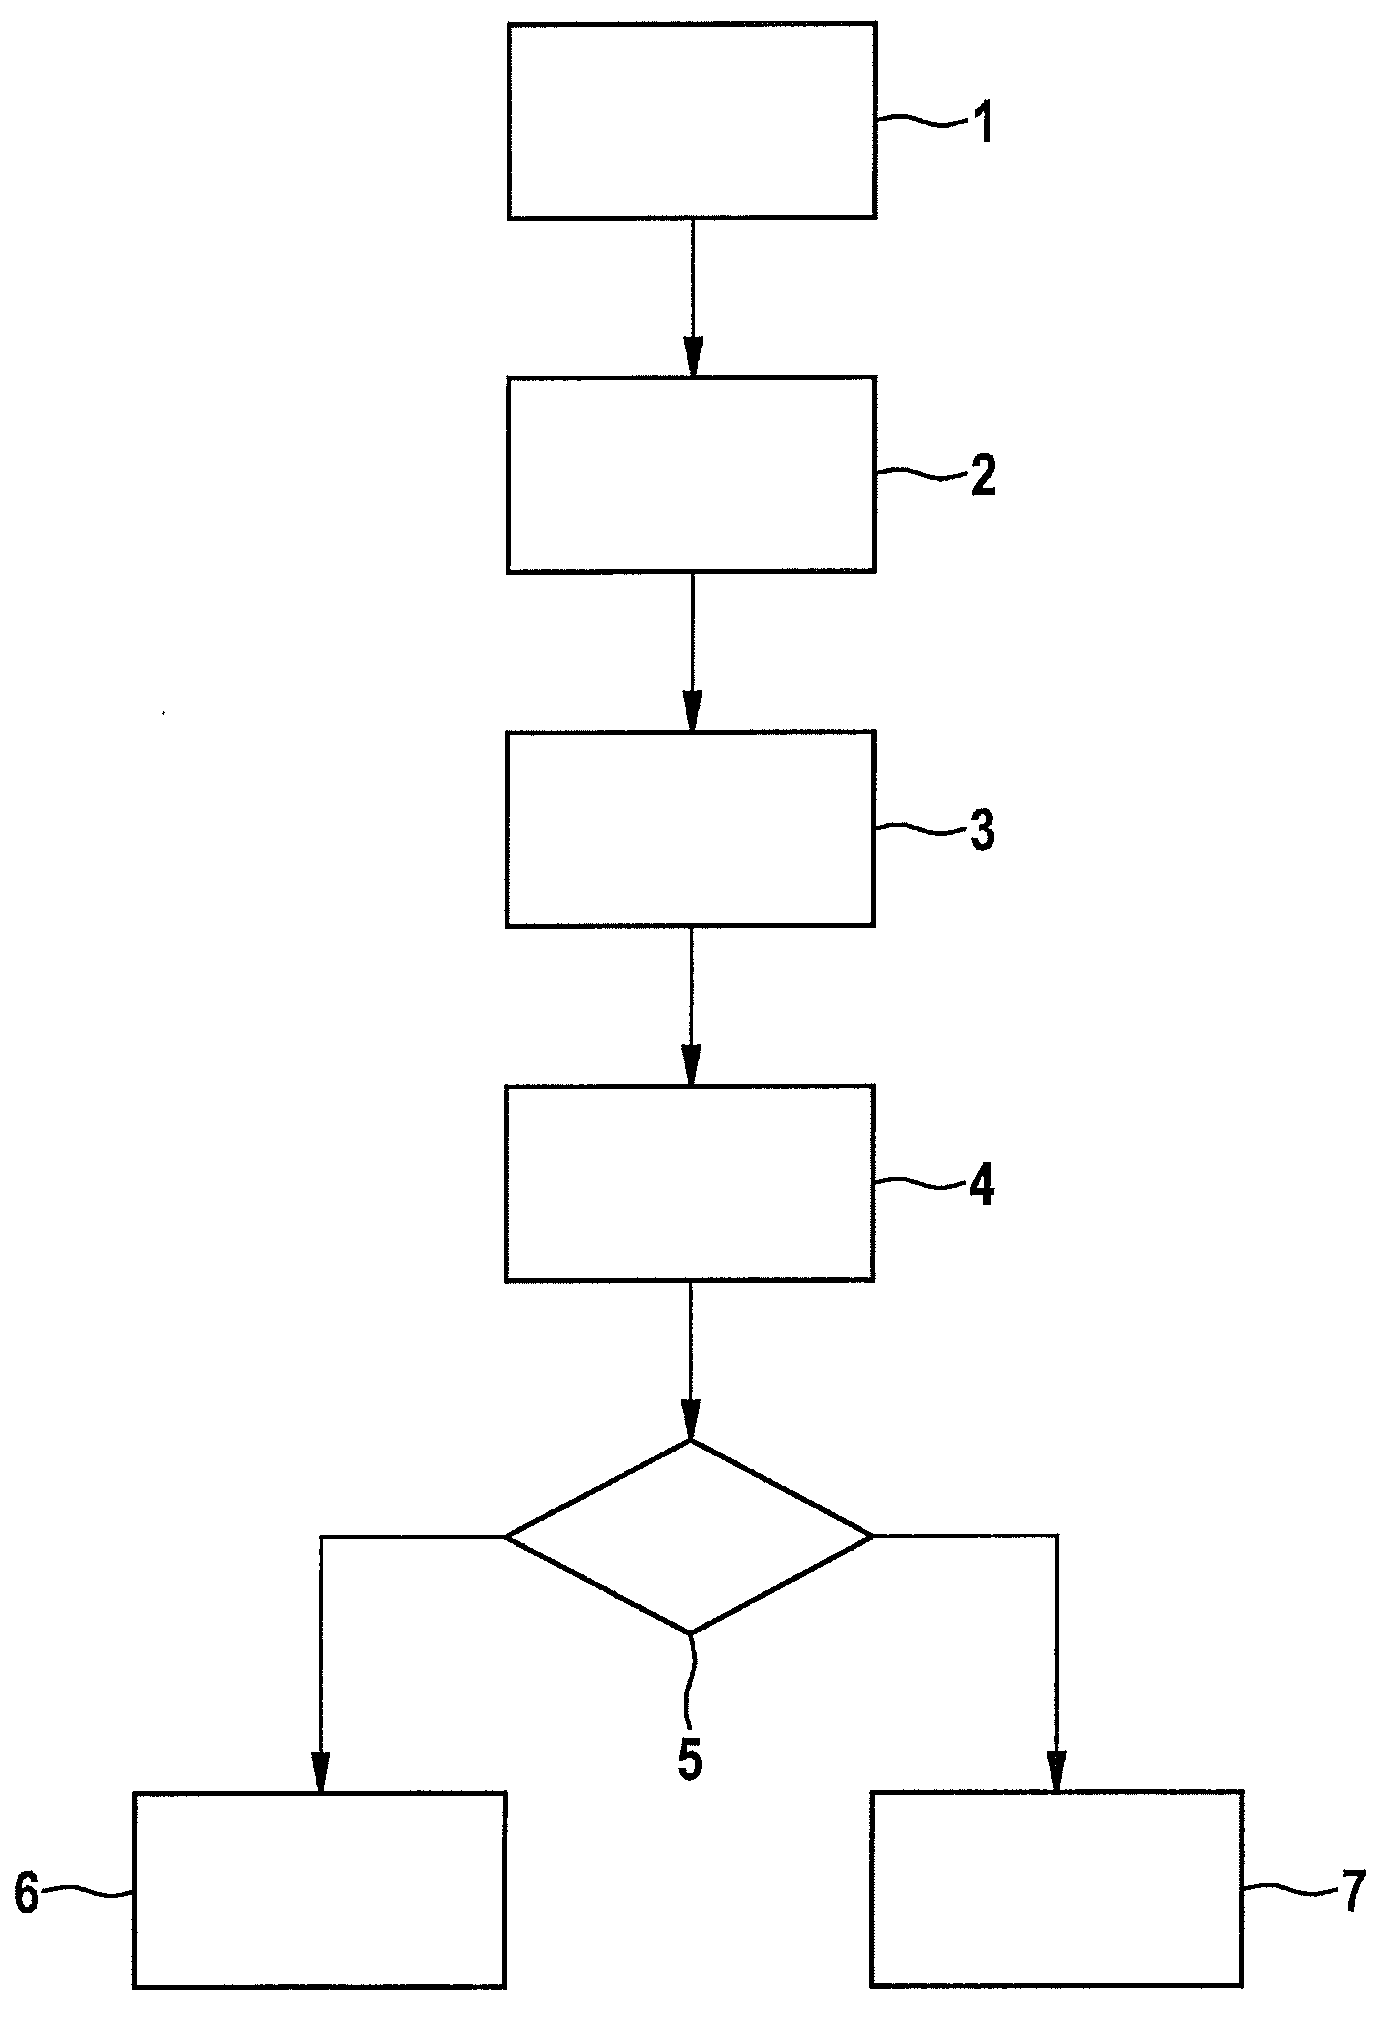 Method for diagnosing a tank venting valve